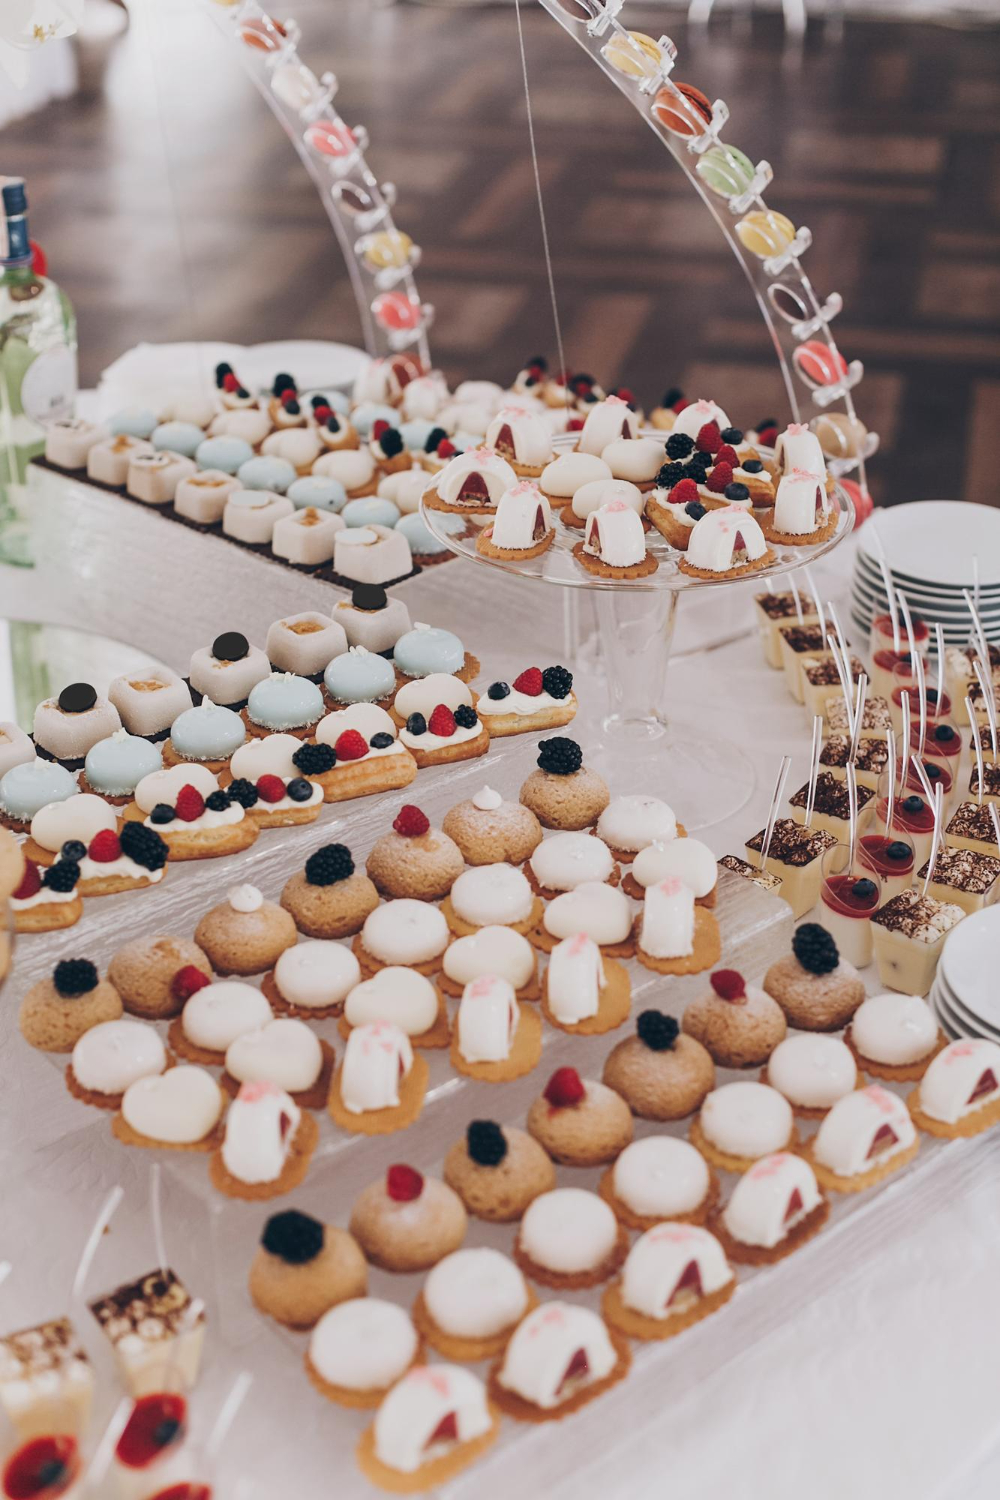 delicious creamy desserts with fruits macarons cakes and cookies on table at wedding